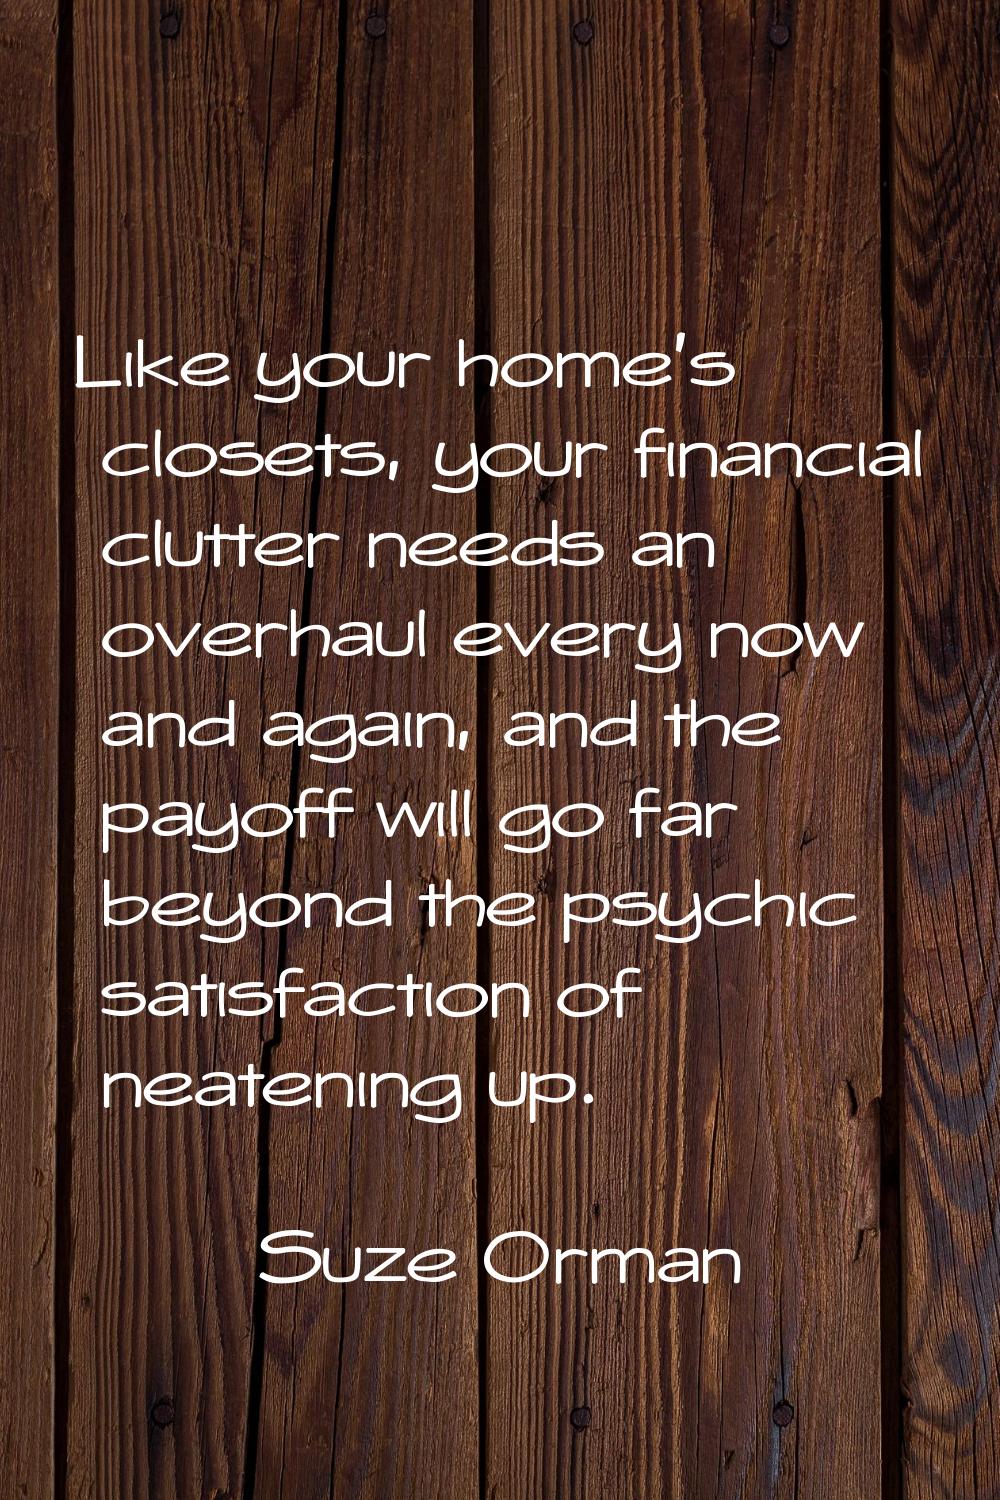 Like your home's closets, your financial clutter needs an overhaul every now and again, and the pay